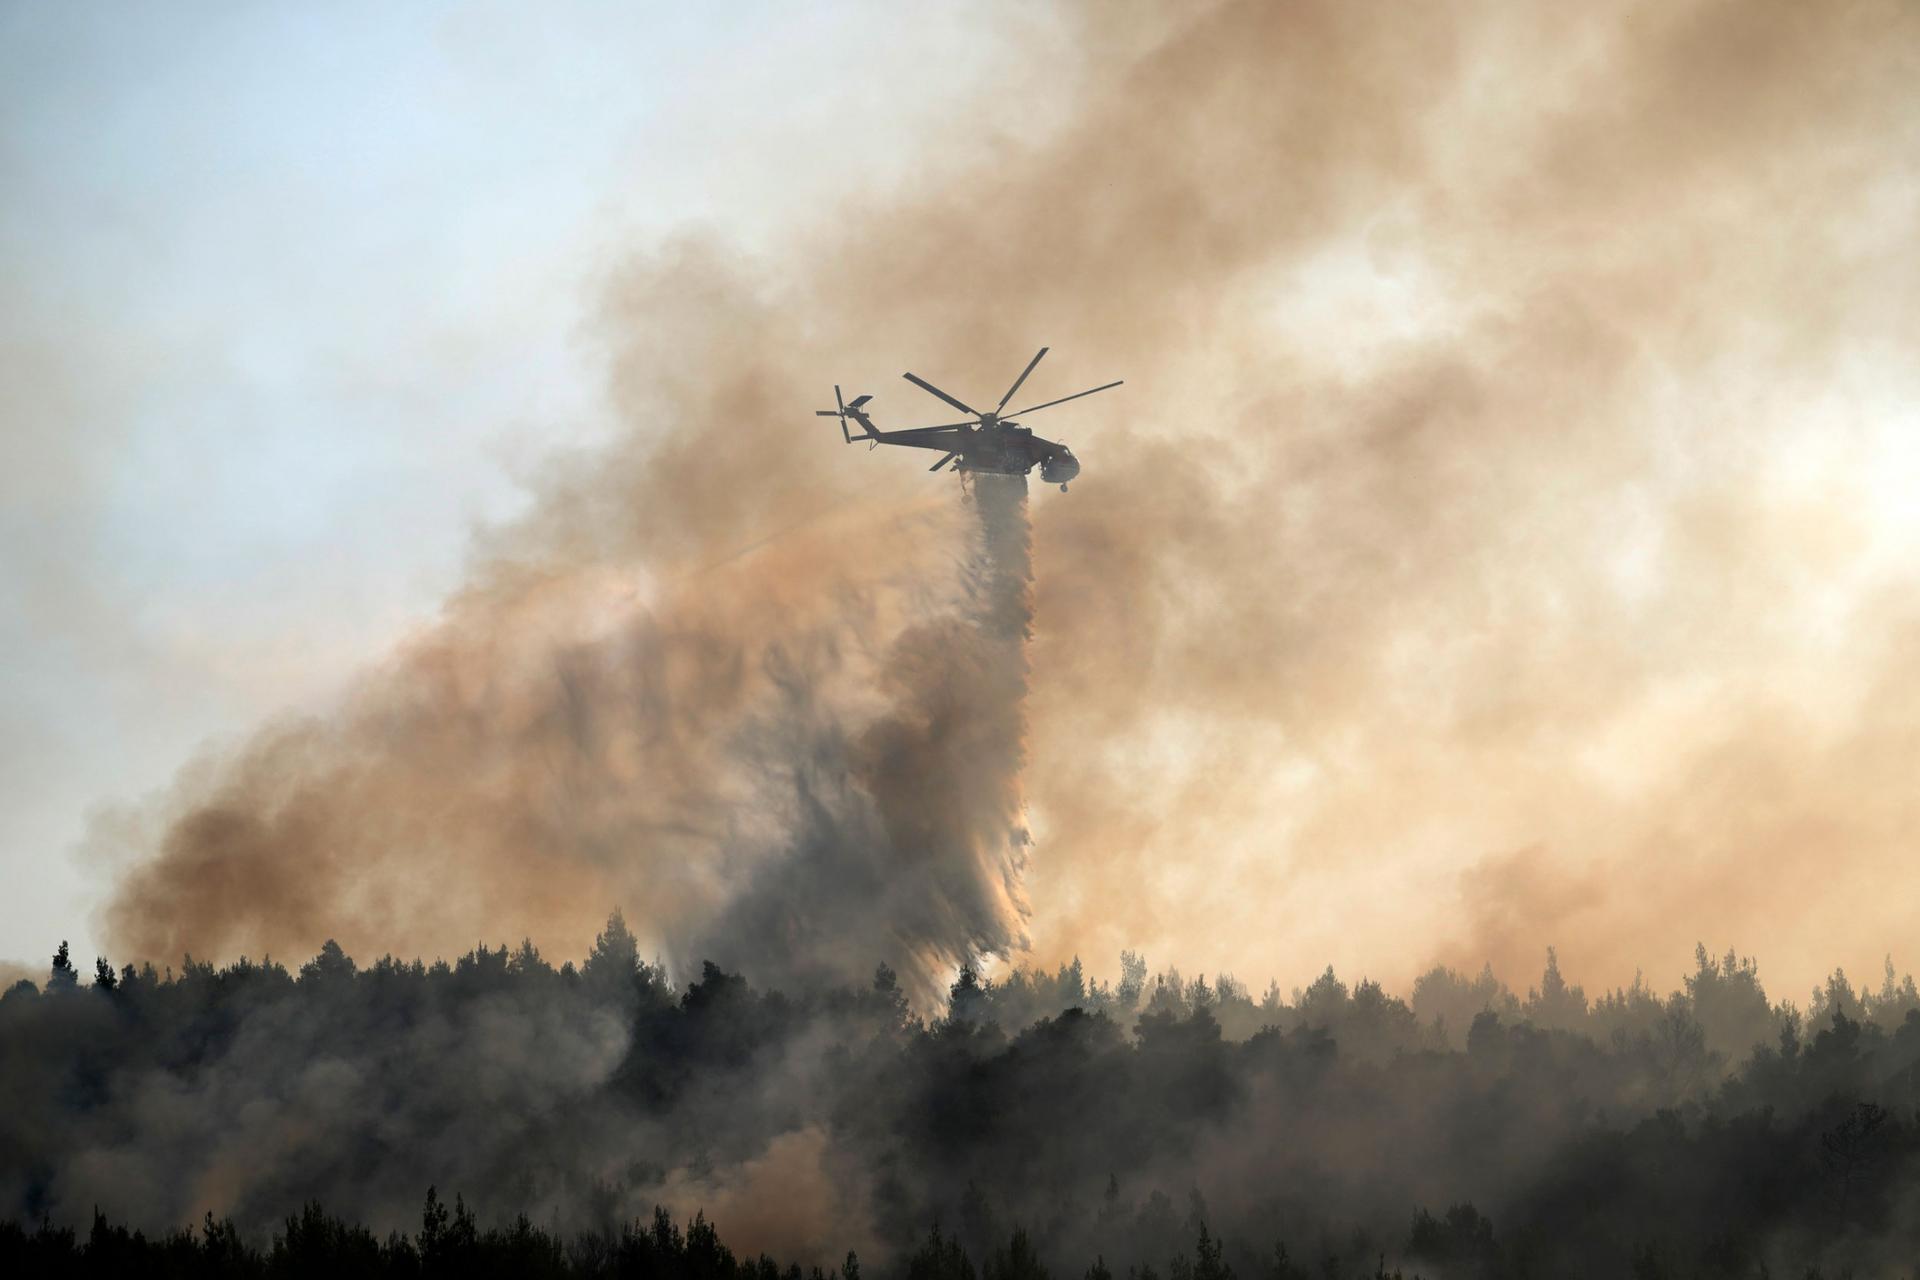 A helicopter is shown in the distance amid smoke rising up from the forest below.